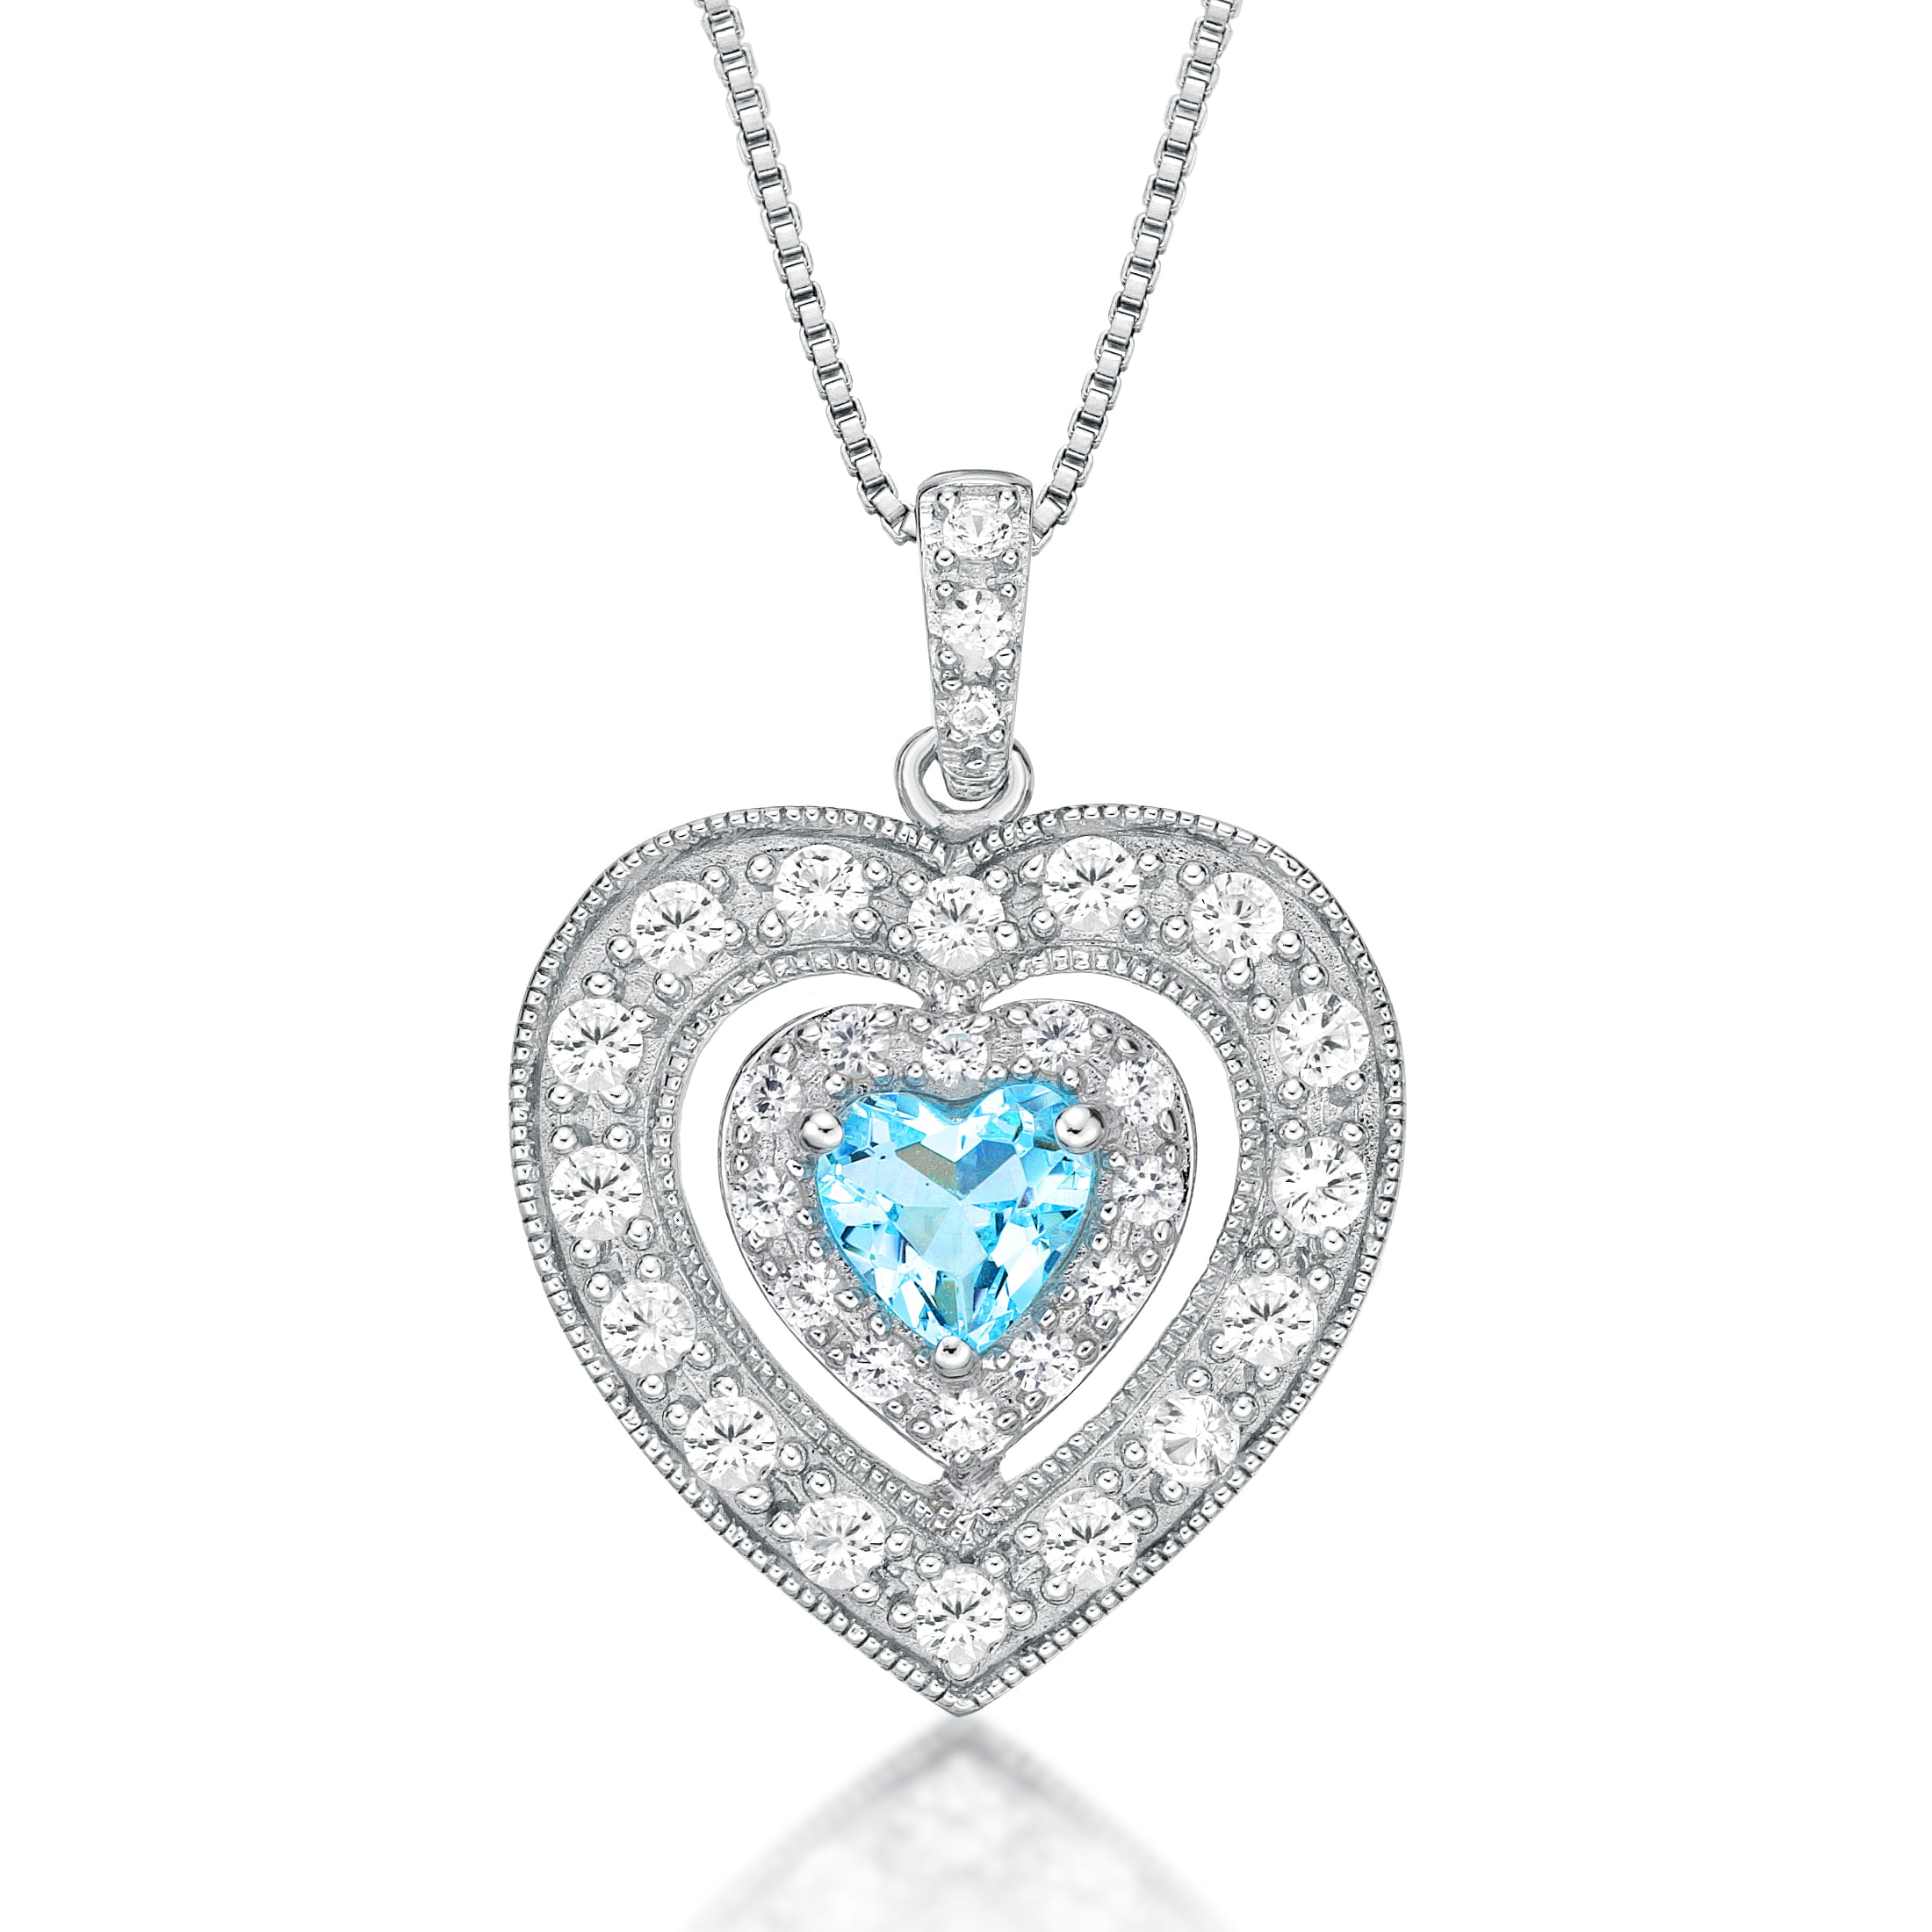 4.50 Ct Heart Sterling Silver Blue Sapphire White Topaz Pendant Chain Necklace 